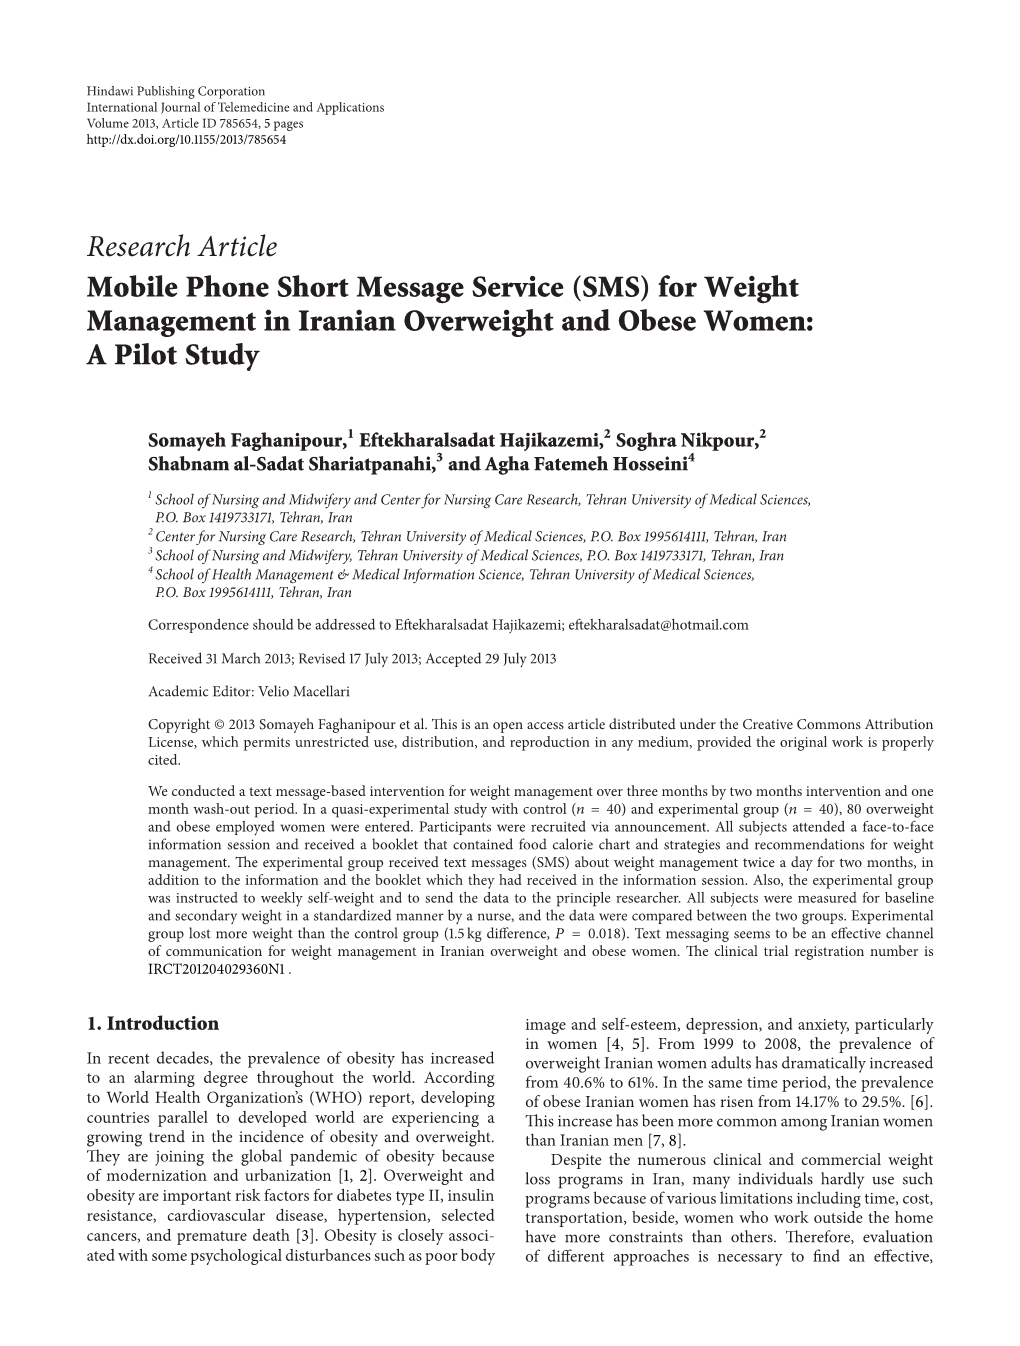 Mobile Phone Short Message Service (SMS) for Weight Management in Iranian Overweight and Obese Women: a Pilot Study